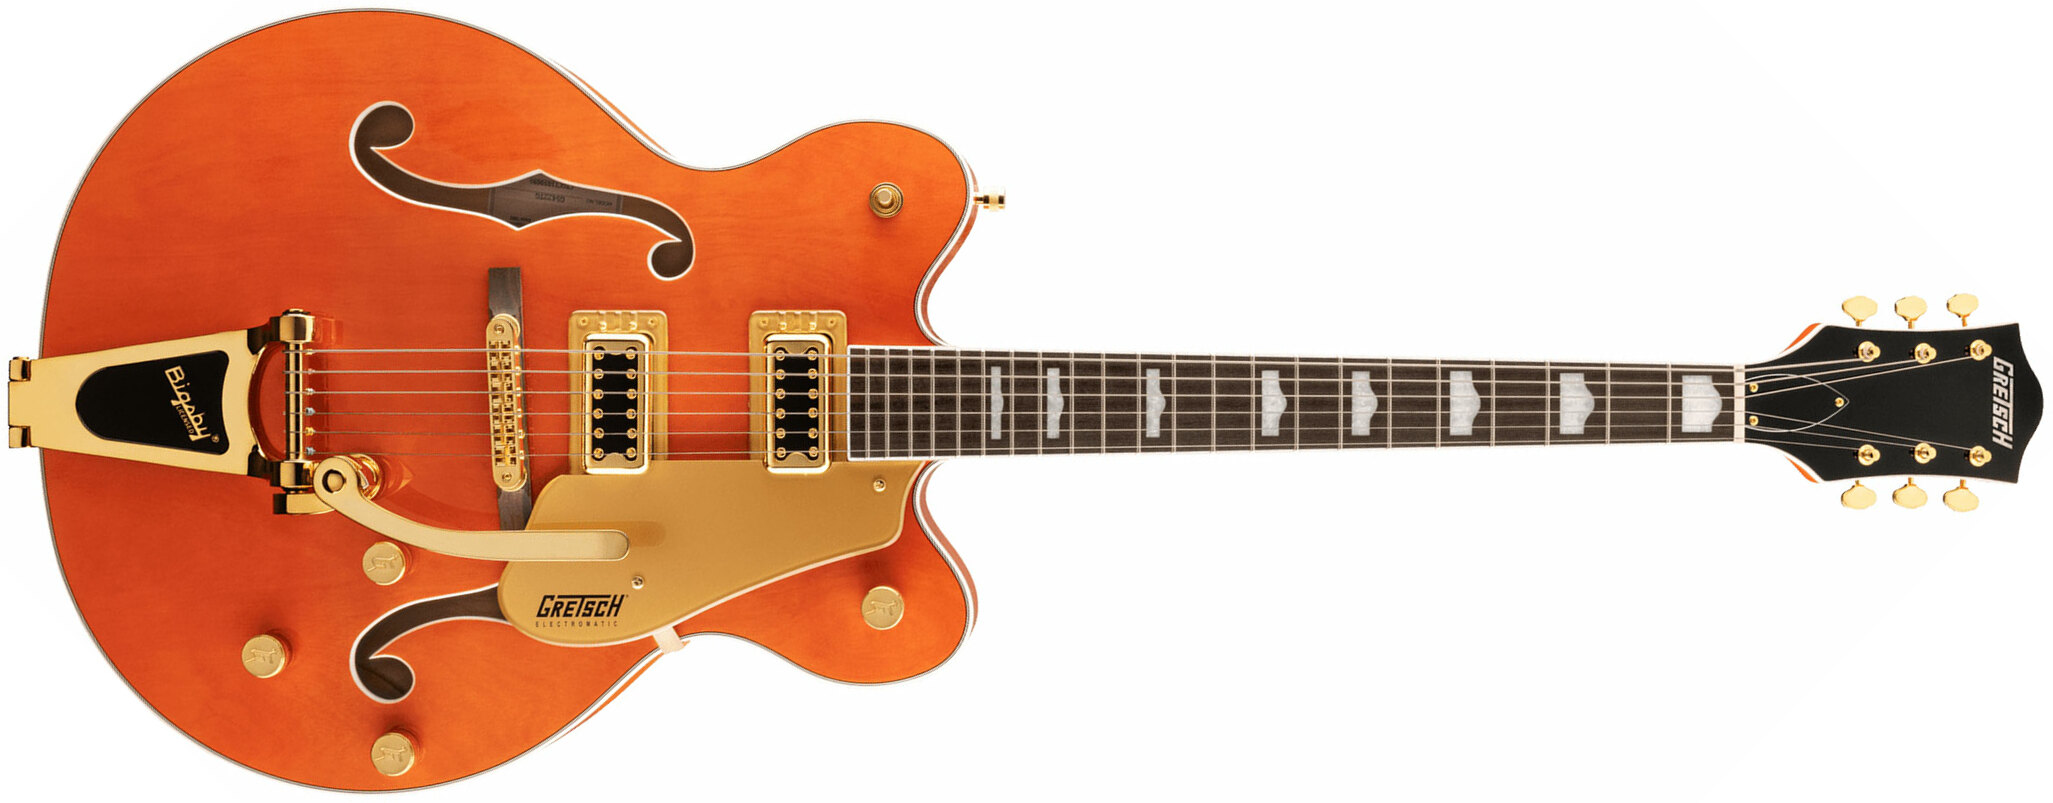 Gretsch G5422tg Electromatic Classic Hollow Body Dc Bigsby Hh Lau - Orange Stain - Semi-hollow electric guitar - Main picture